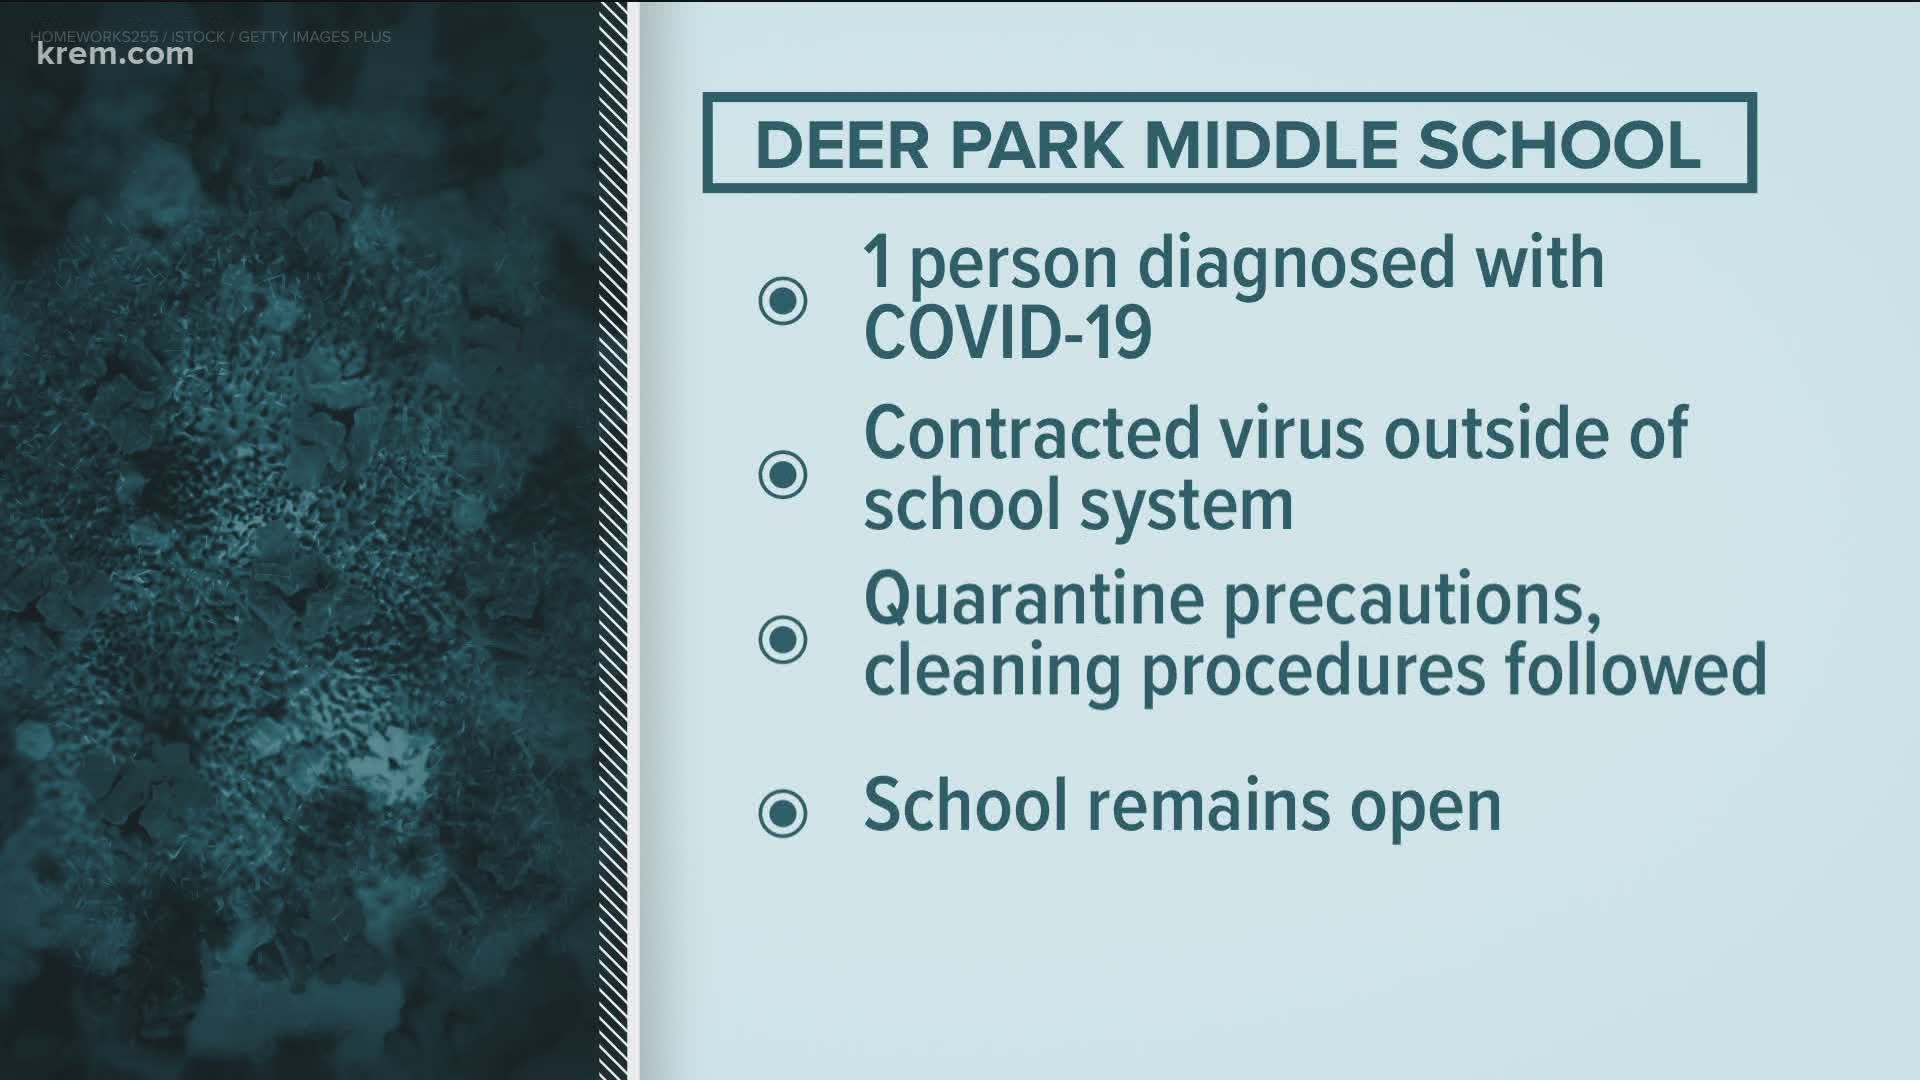 Deer Park Middle School, Skyway Elementary School and Bonners Ferry High School have reported coronavirus cases.